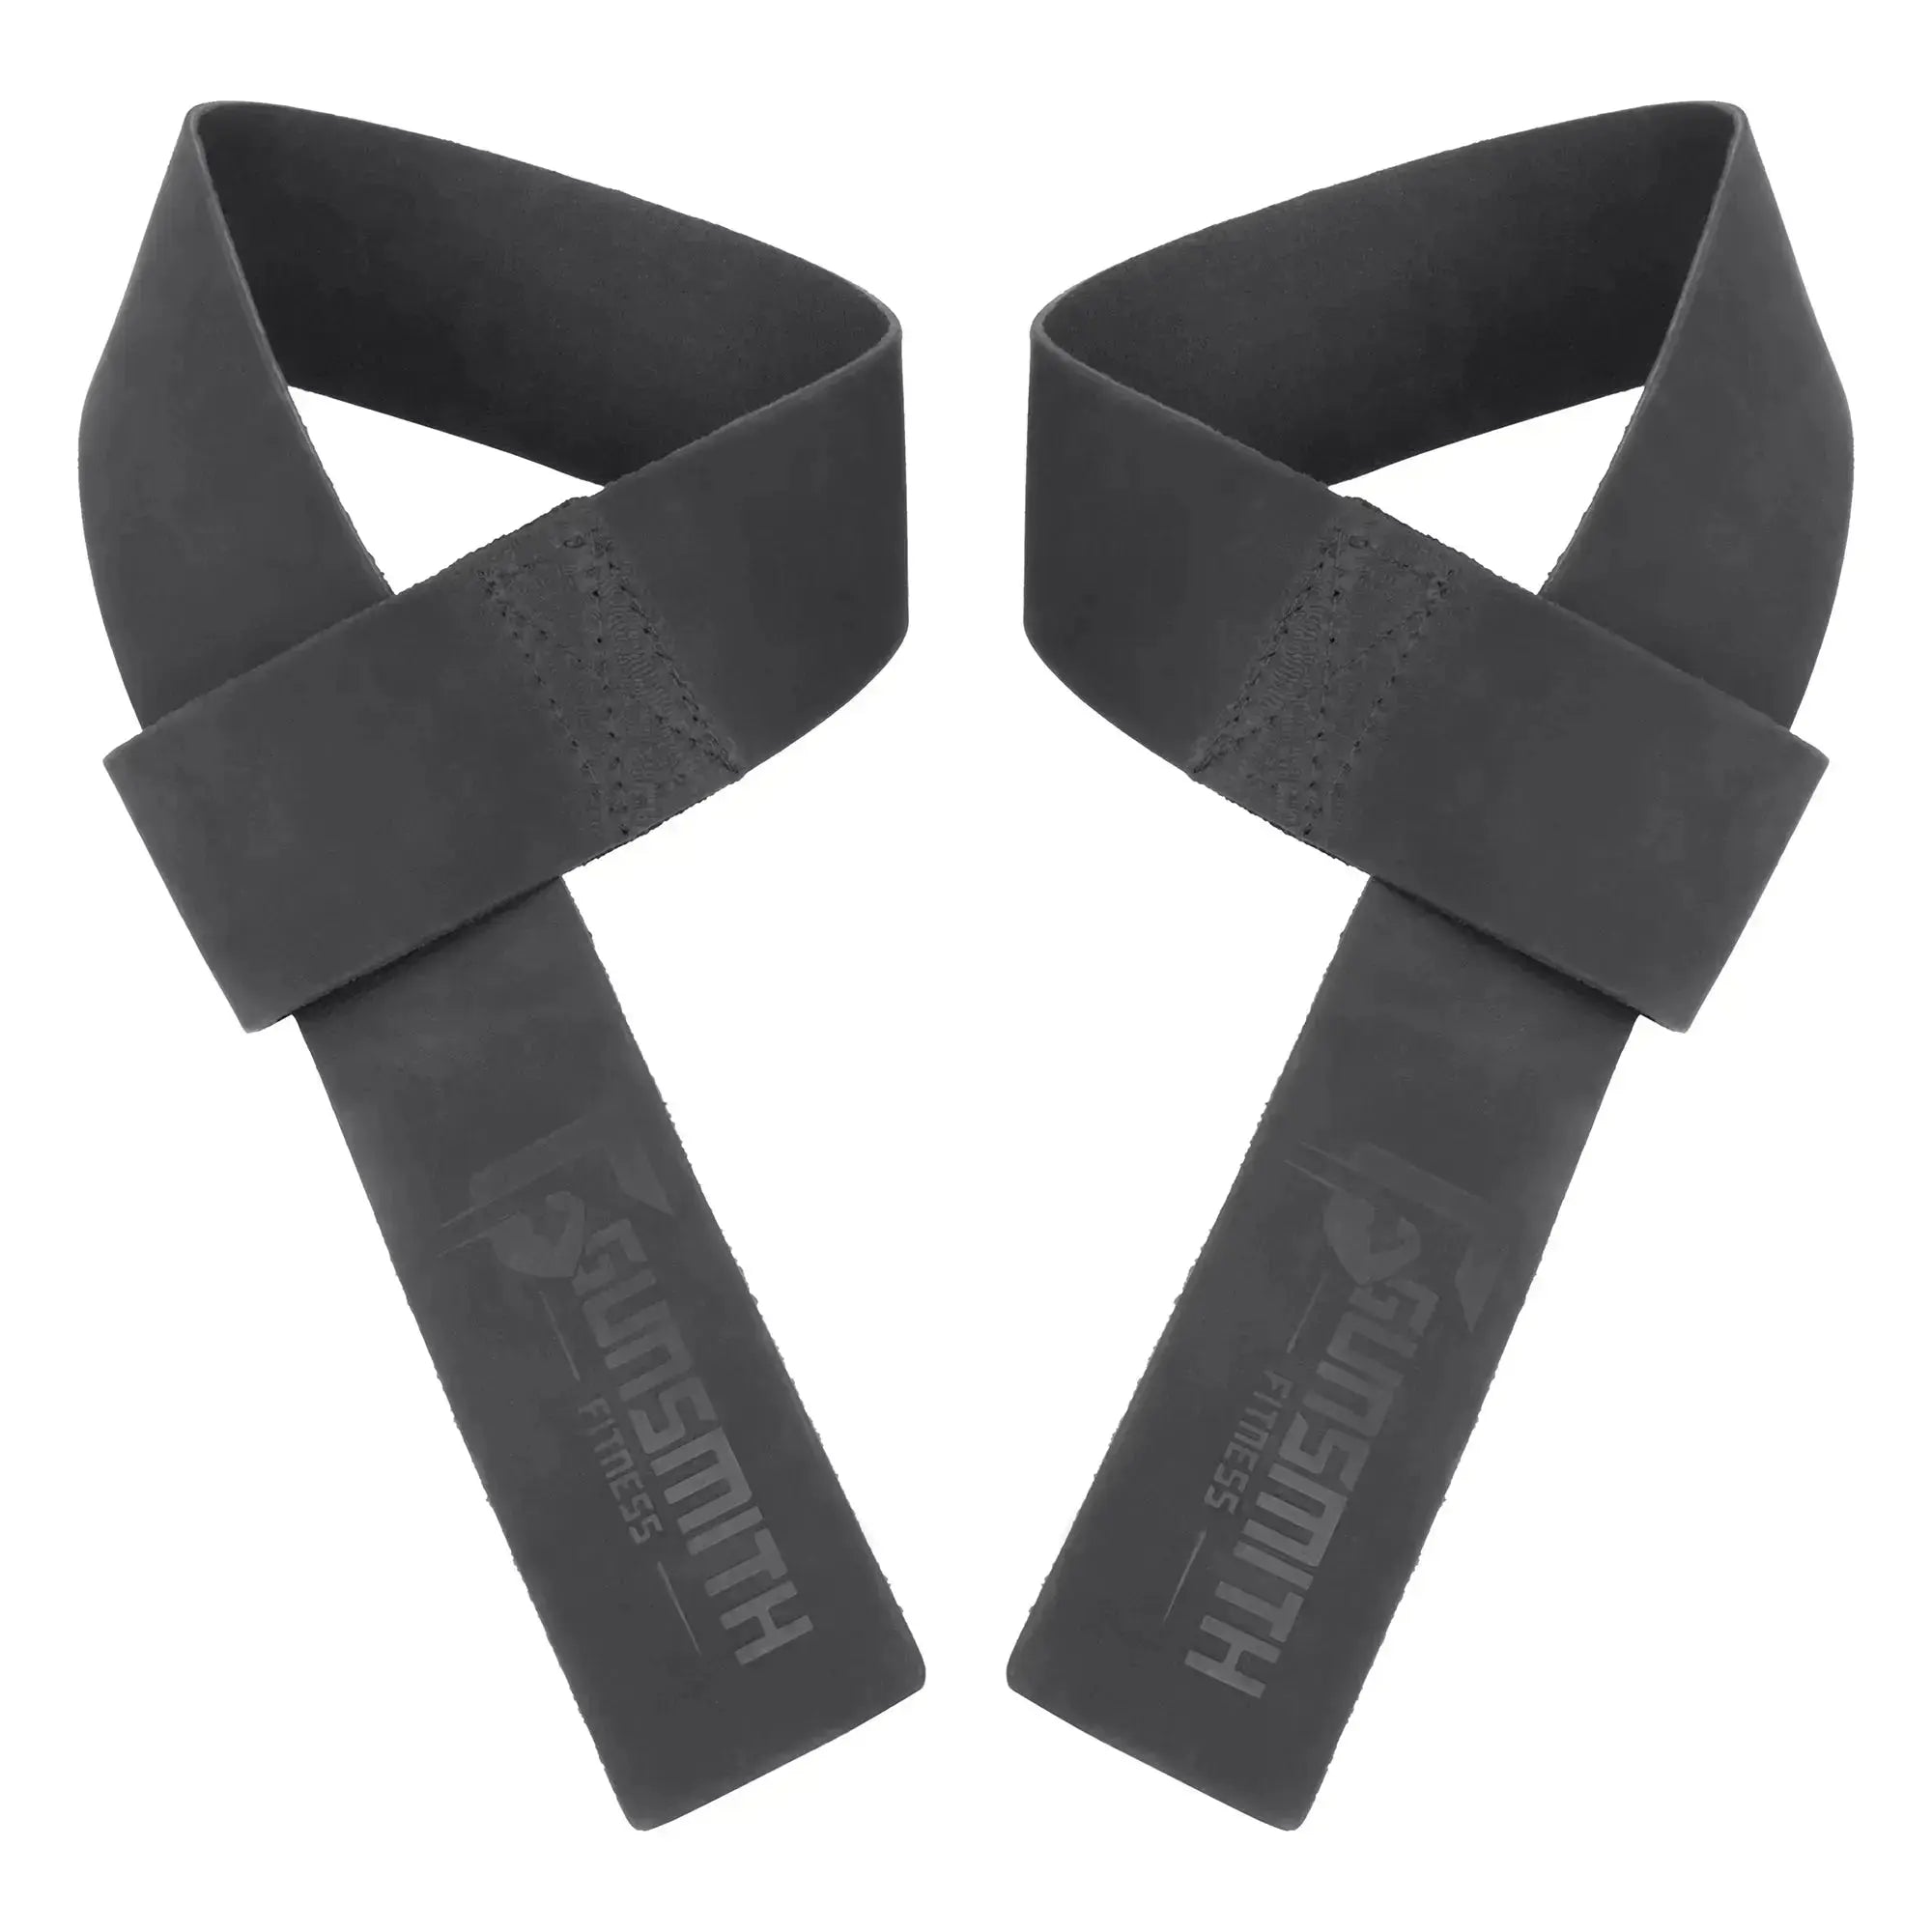 Leather vs Nylon vs Cotton Lifting Straps: Which is the Best?